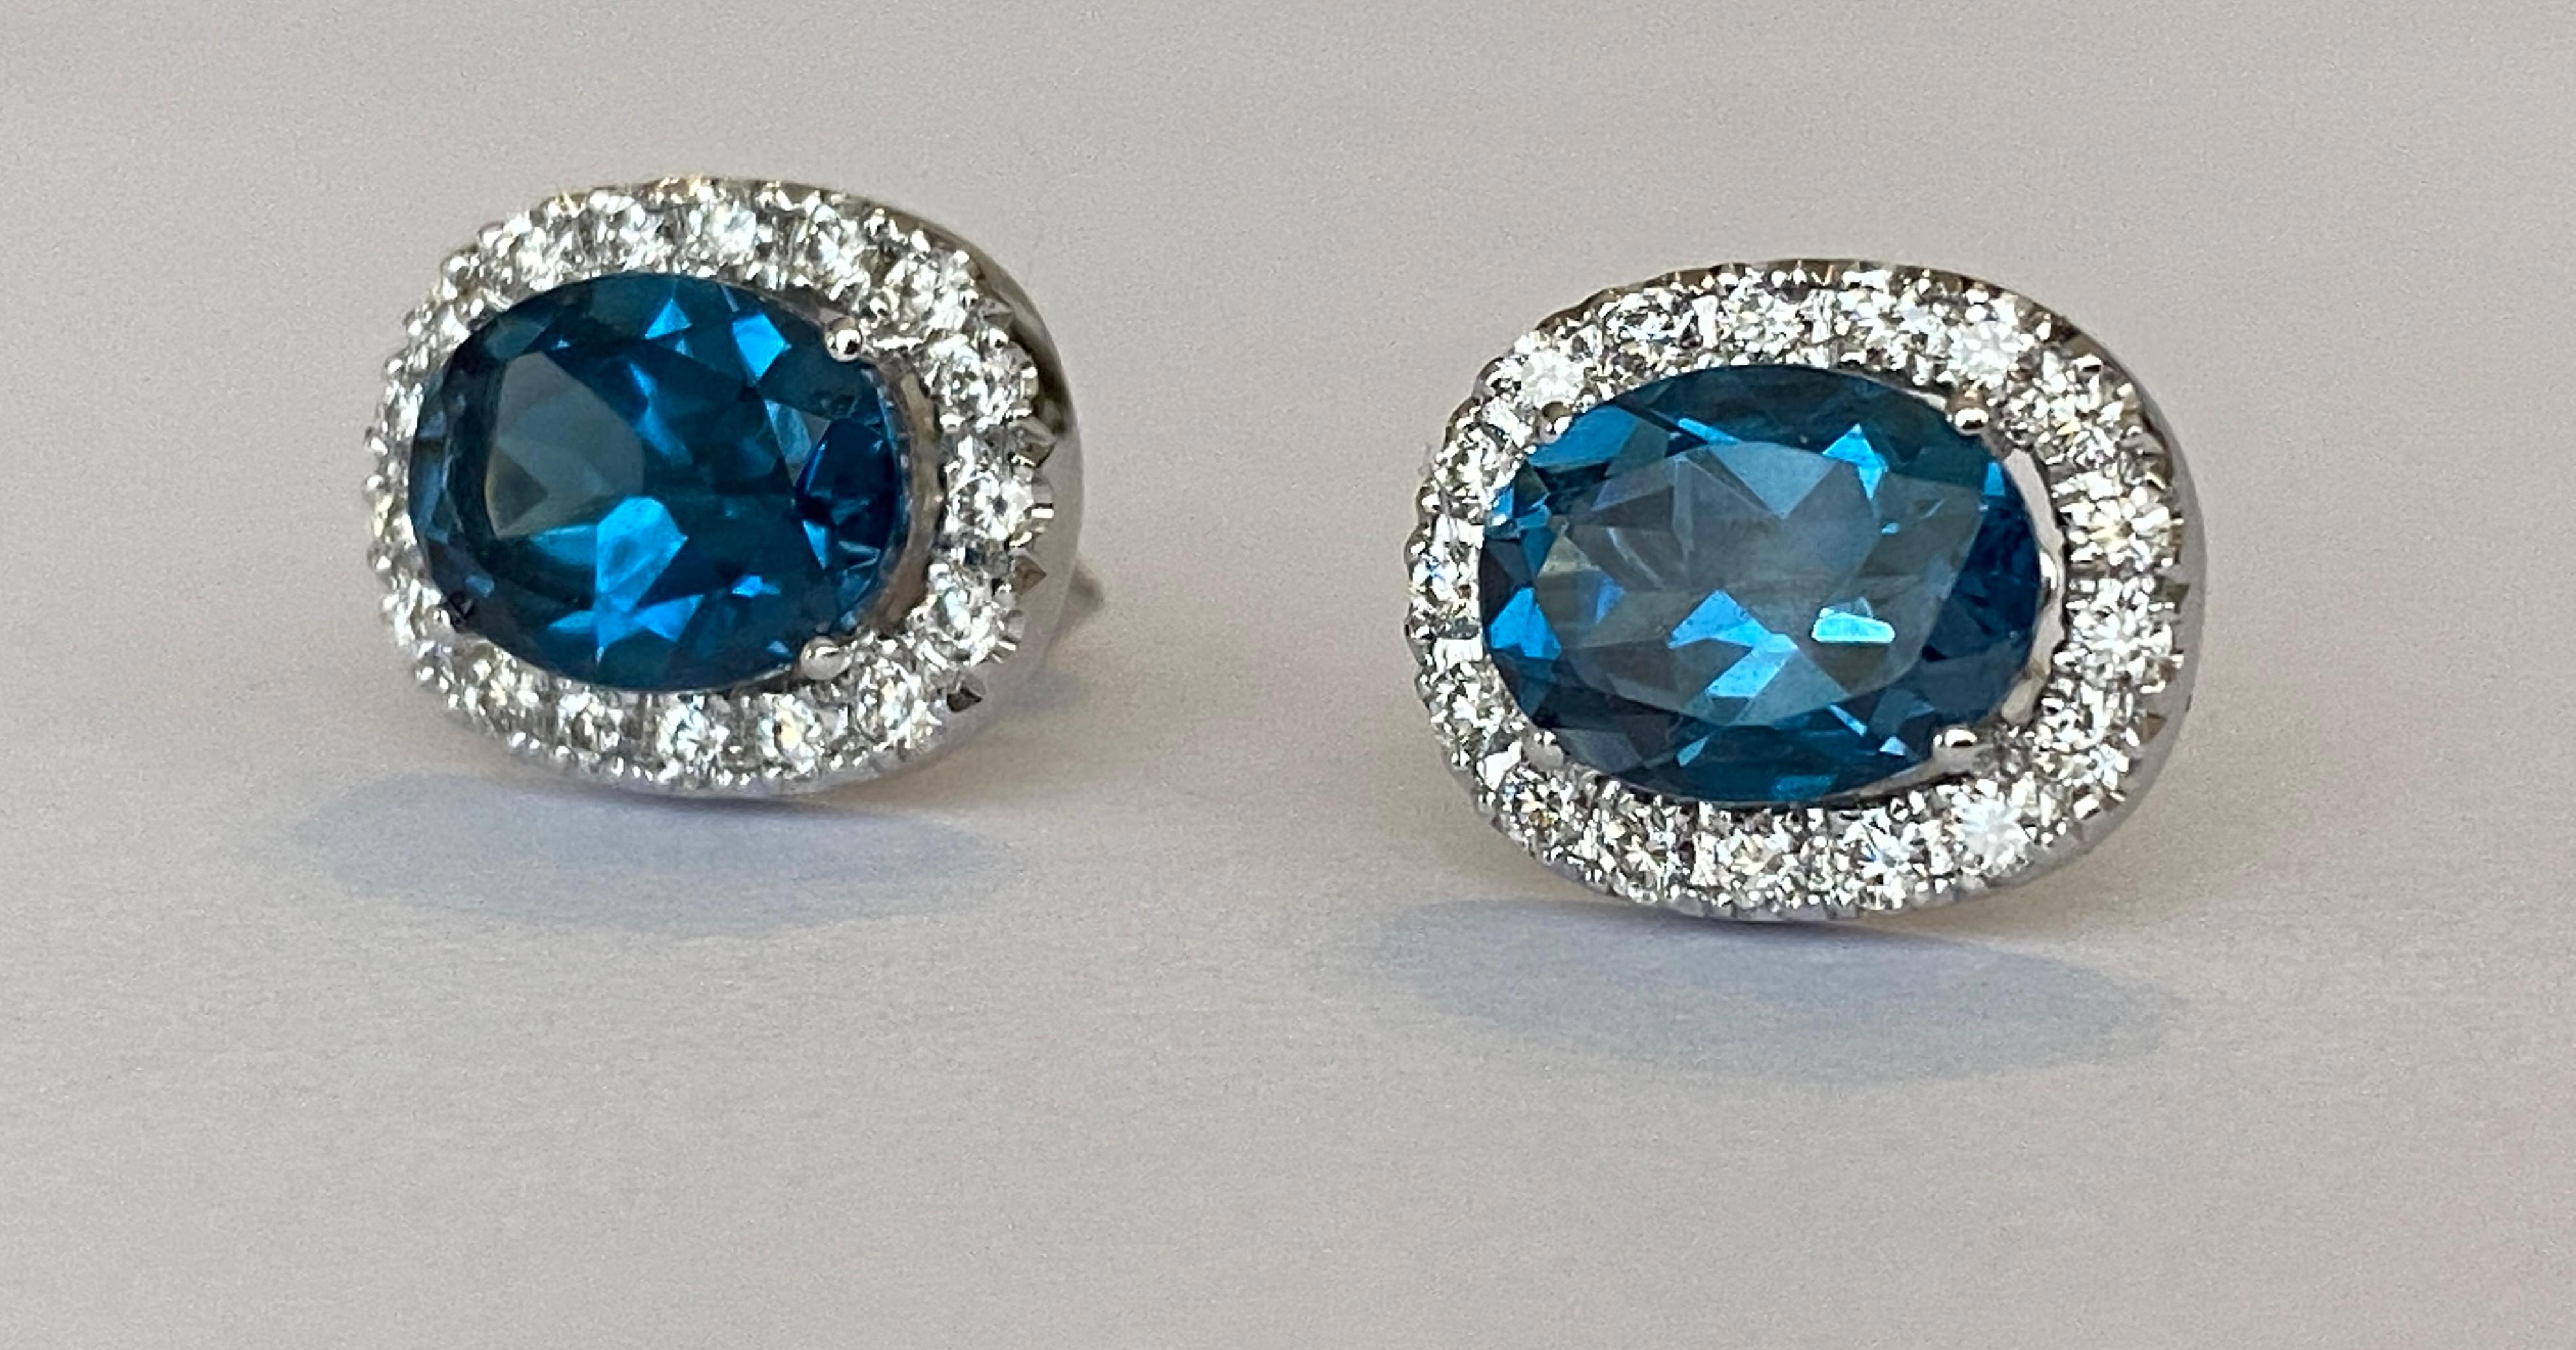 Brilliant Cut 18 kt white gold Diamond earrings studs with London Blue Topaz For Sale